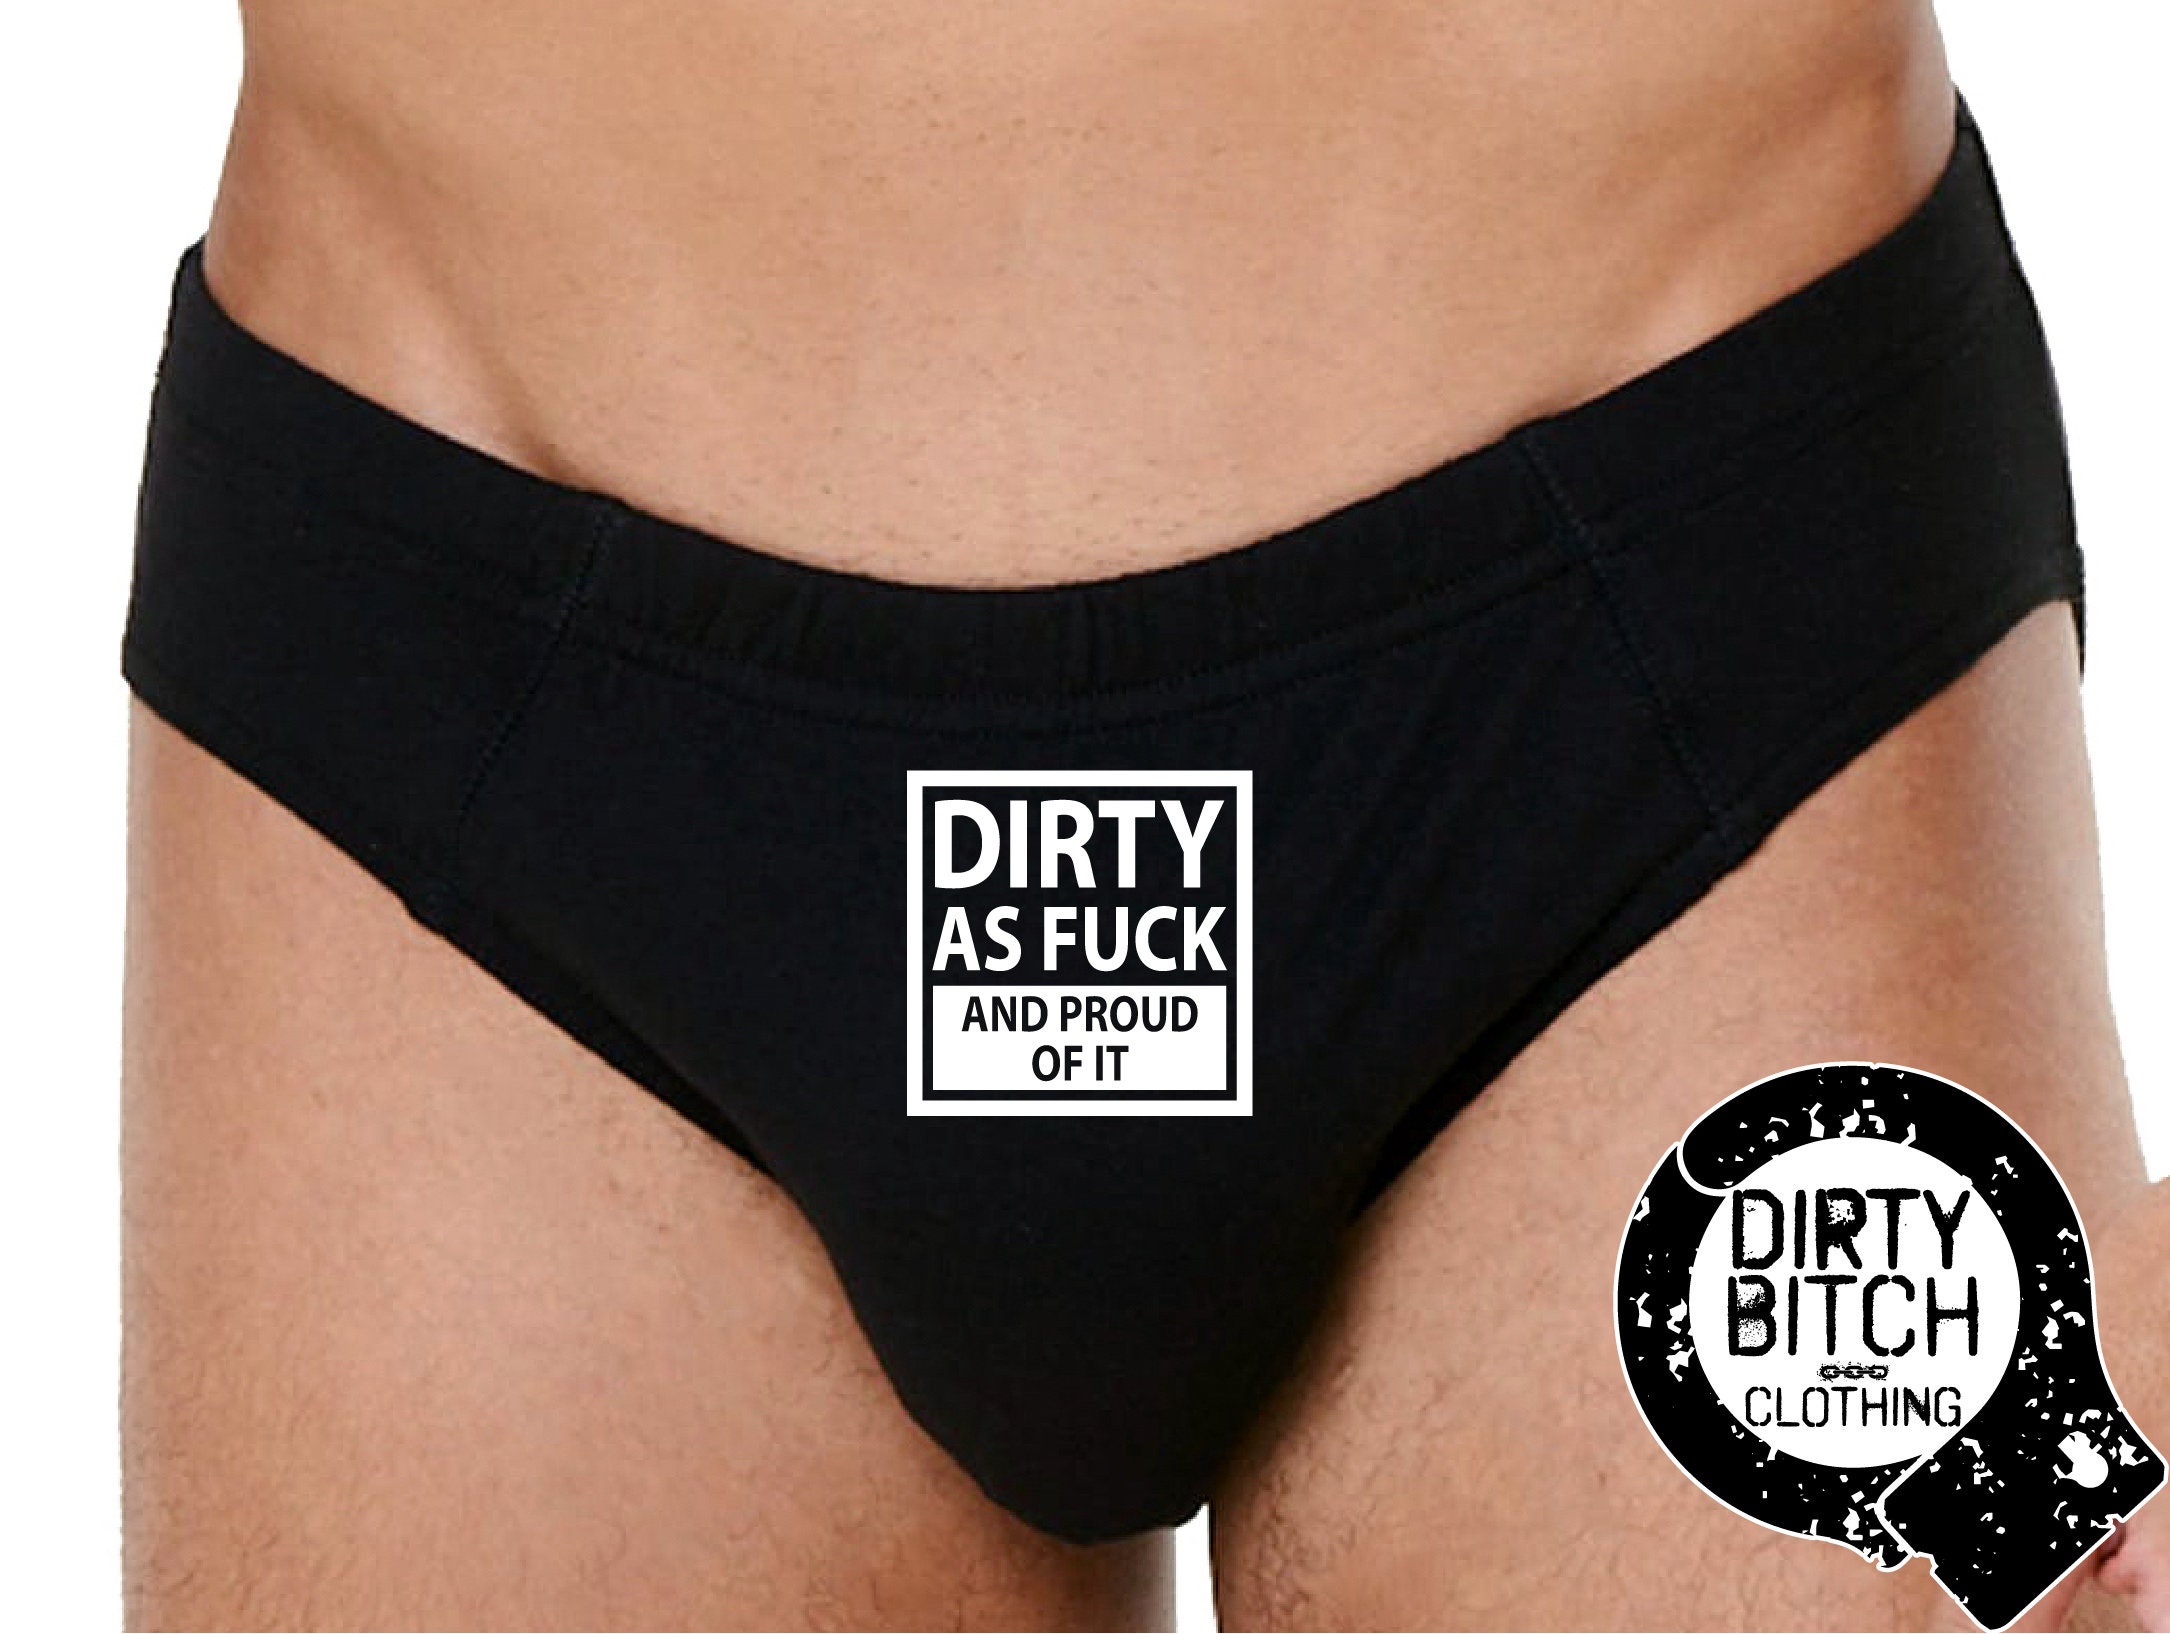 Dirty as Fuck and Proud of It Mens Underwear Adult Fetish photo